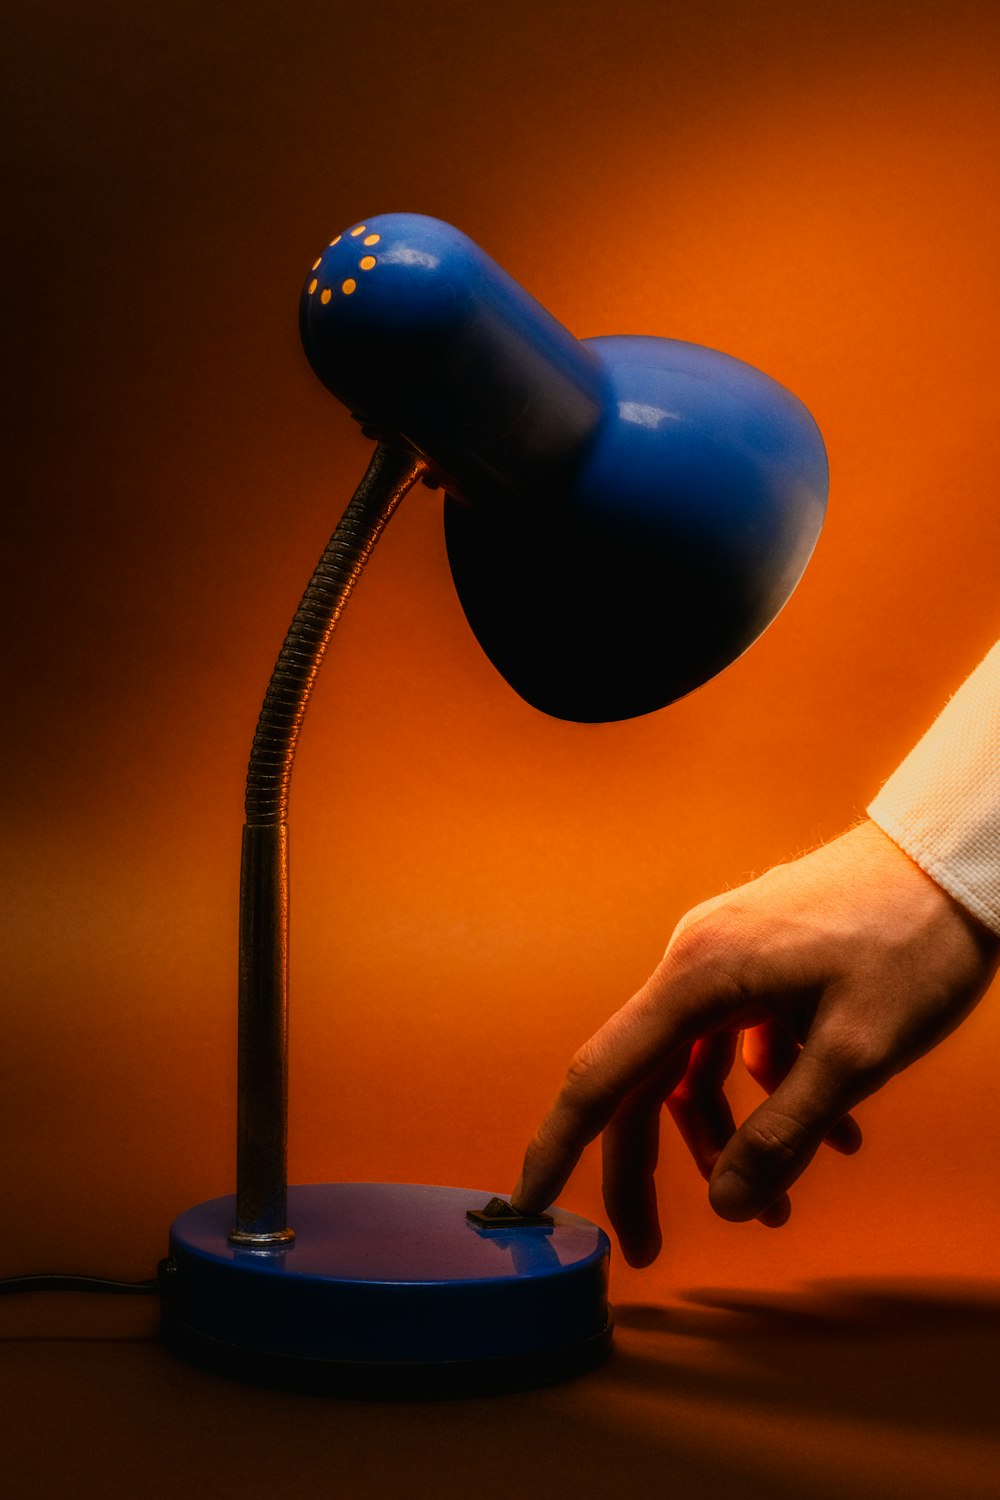 a hand is touching a blue lamp on a table